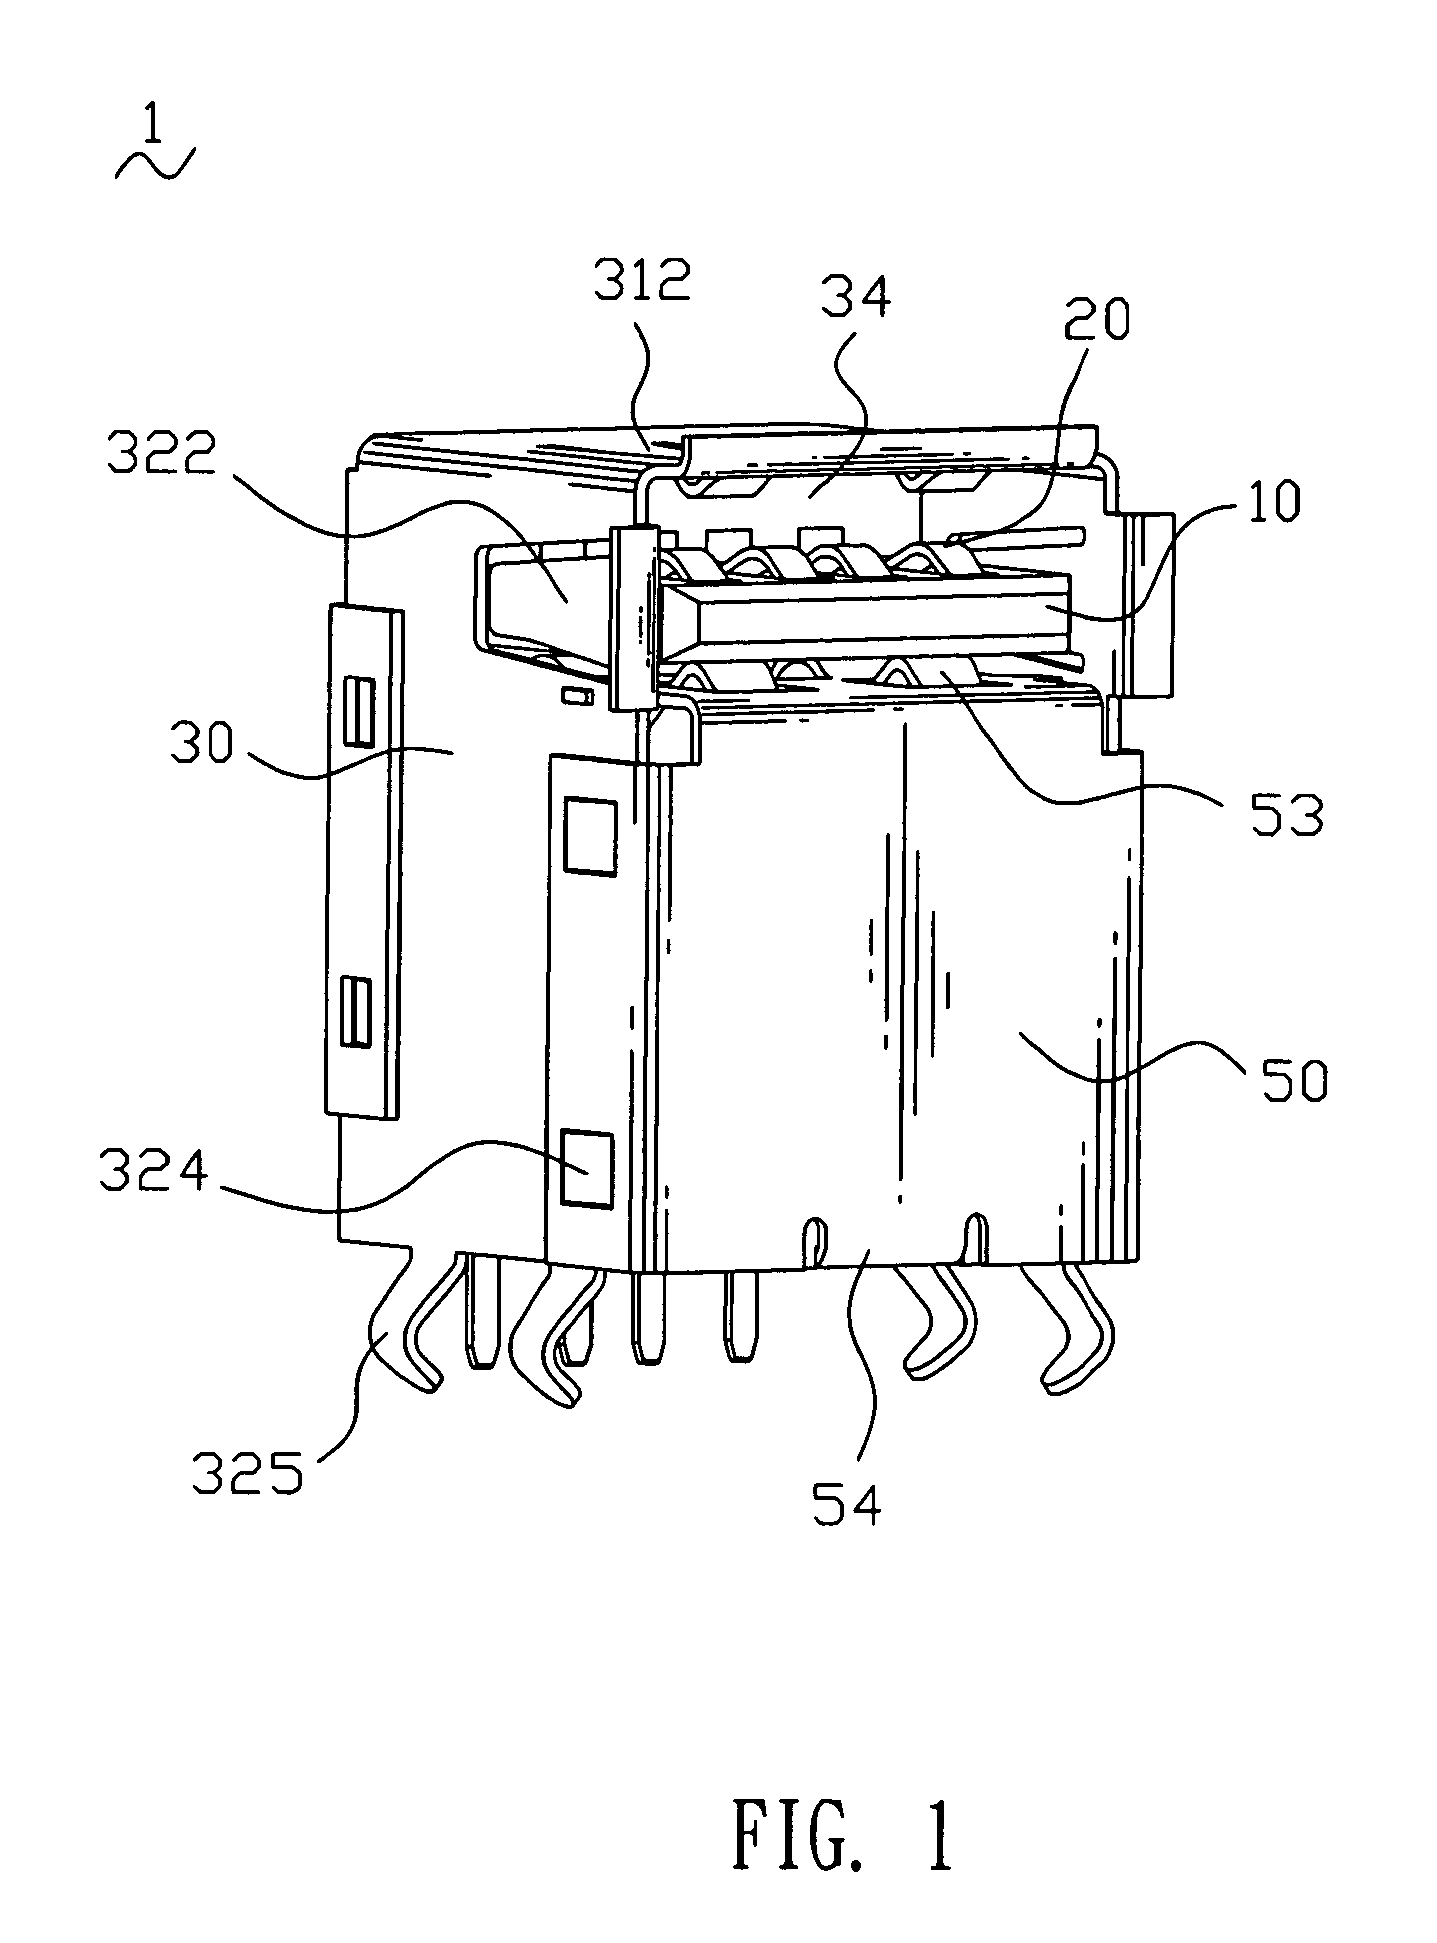 Electrical connector with improved buckling tab